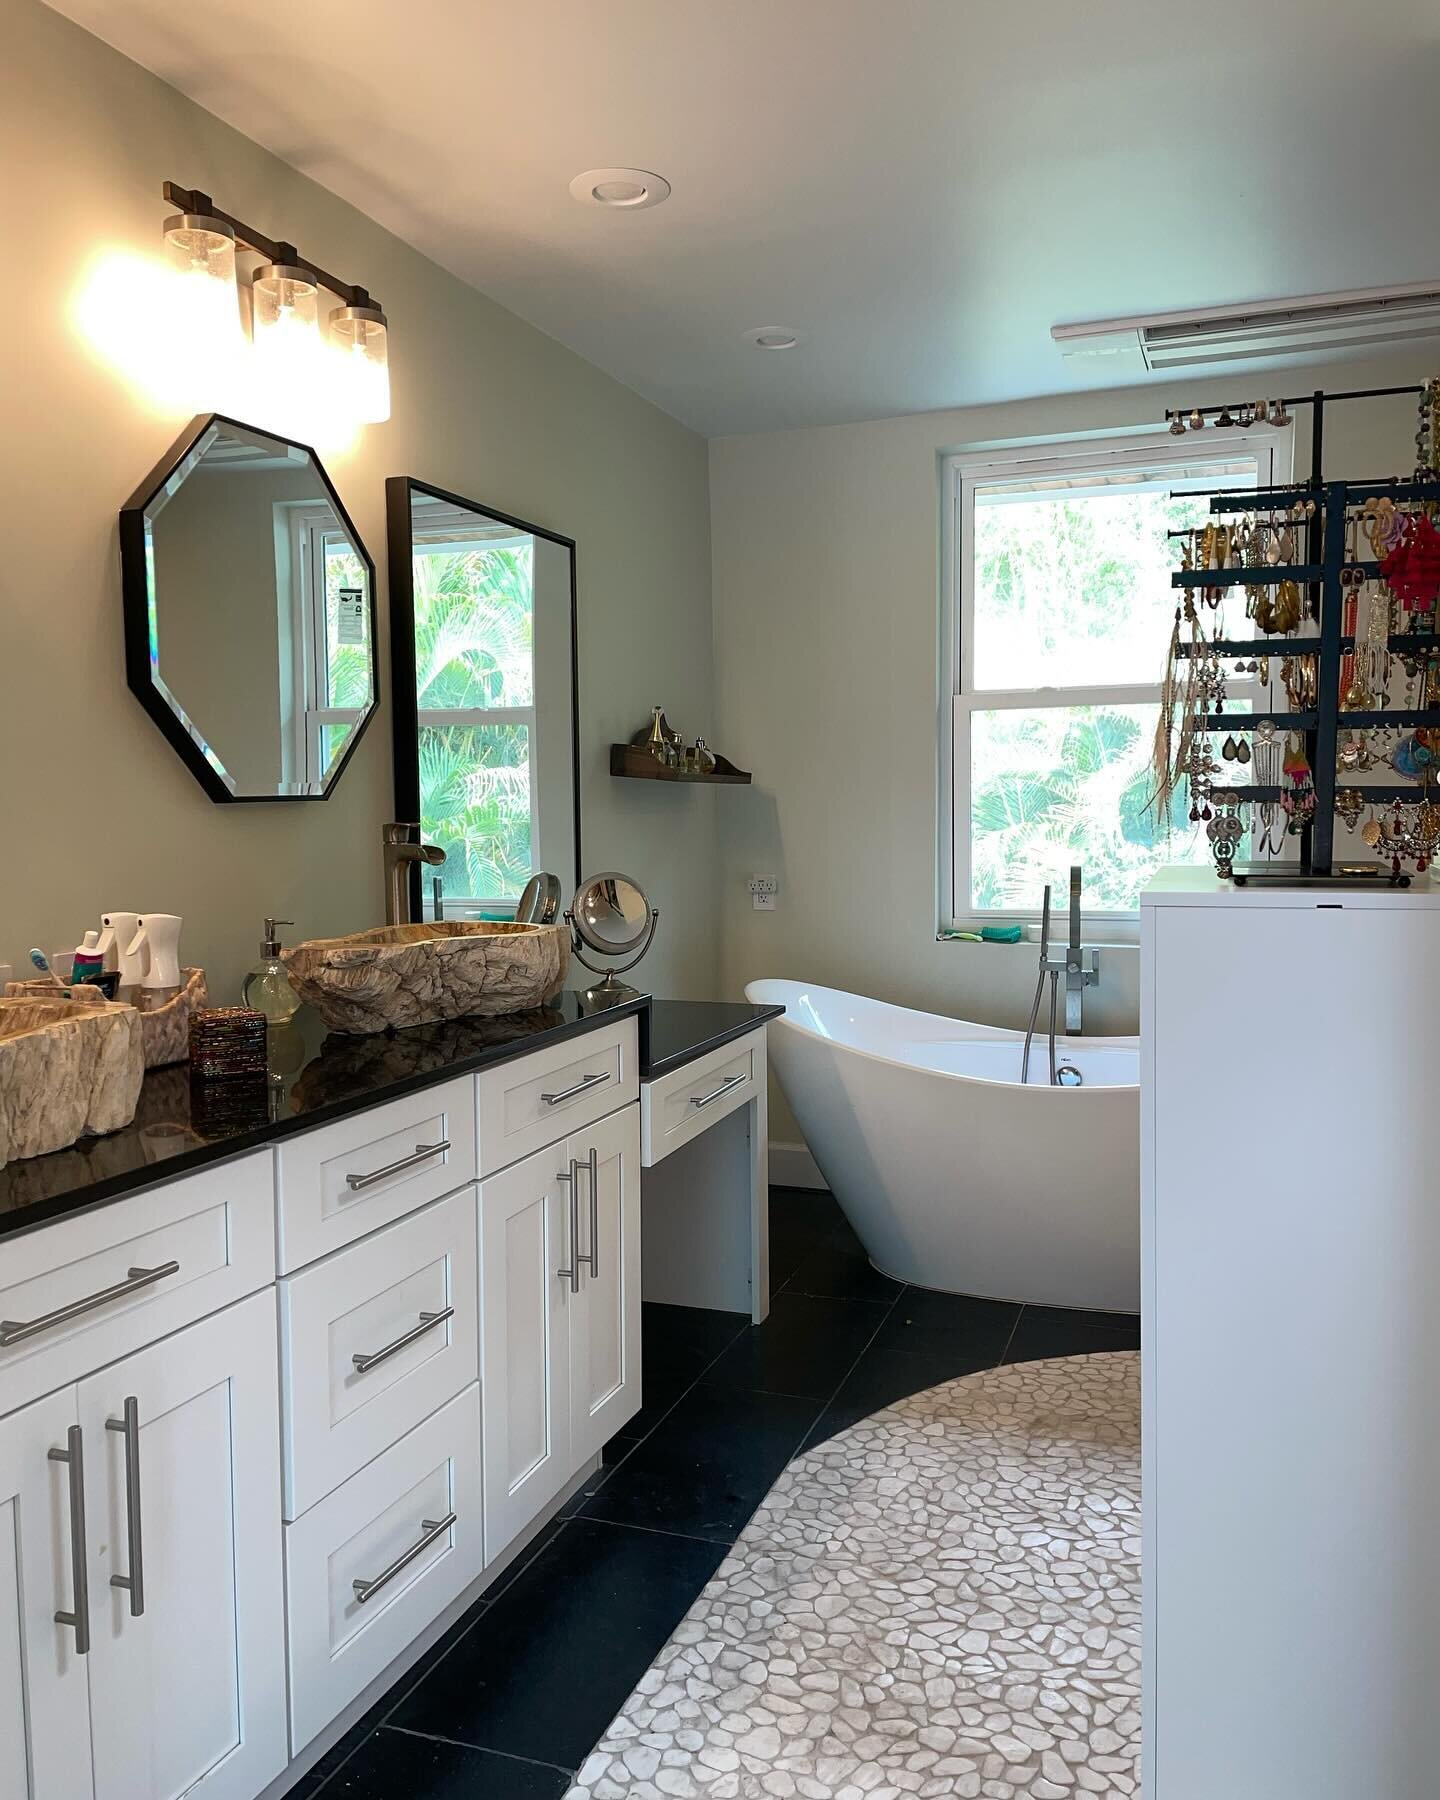 Bathroom move-in for this client&rsquo;s unique home! Every room is a different element and even has a koi pond in one hallway! 🌱🌬️🔥💧😍

#moveinday #professionalorganizer #organizedliving #bathroomorganization #organizedbathroom #fourthelement #e